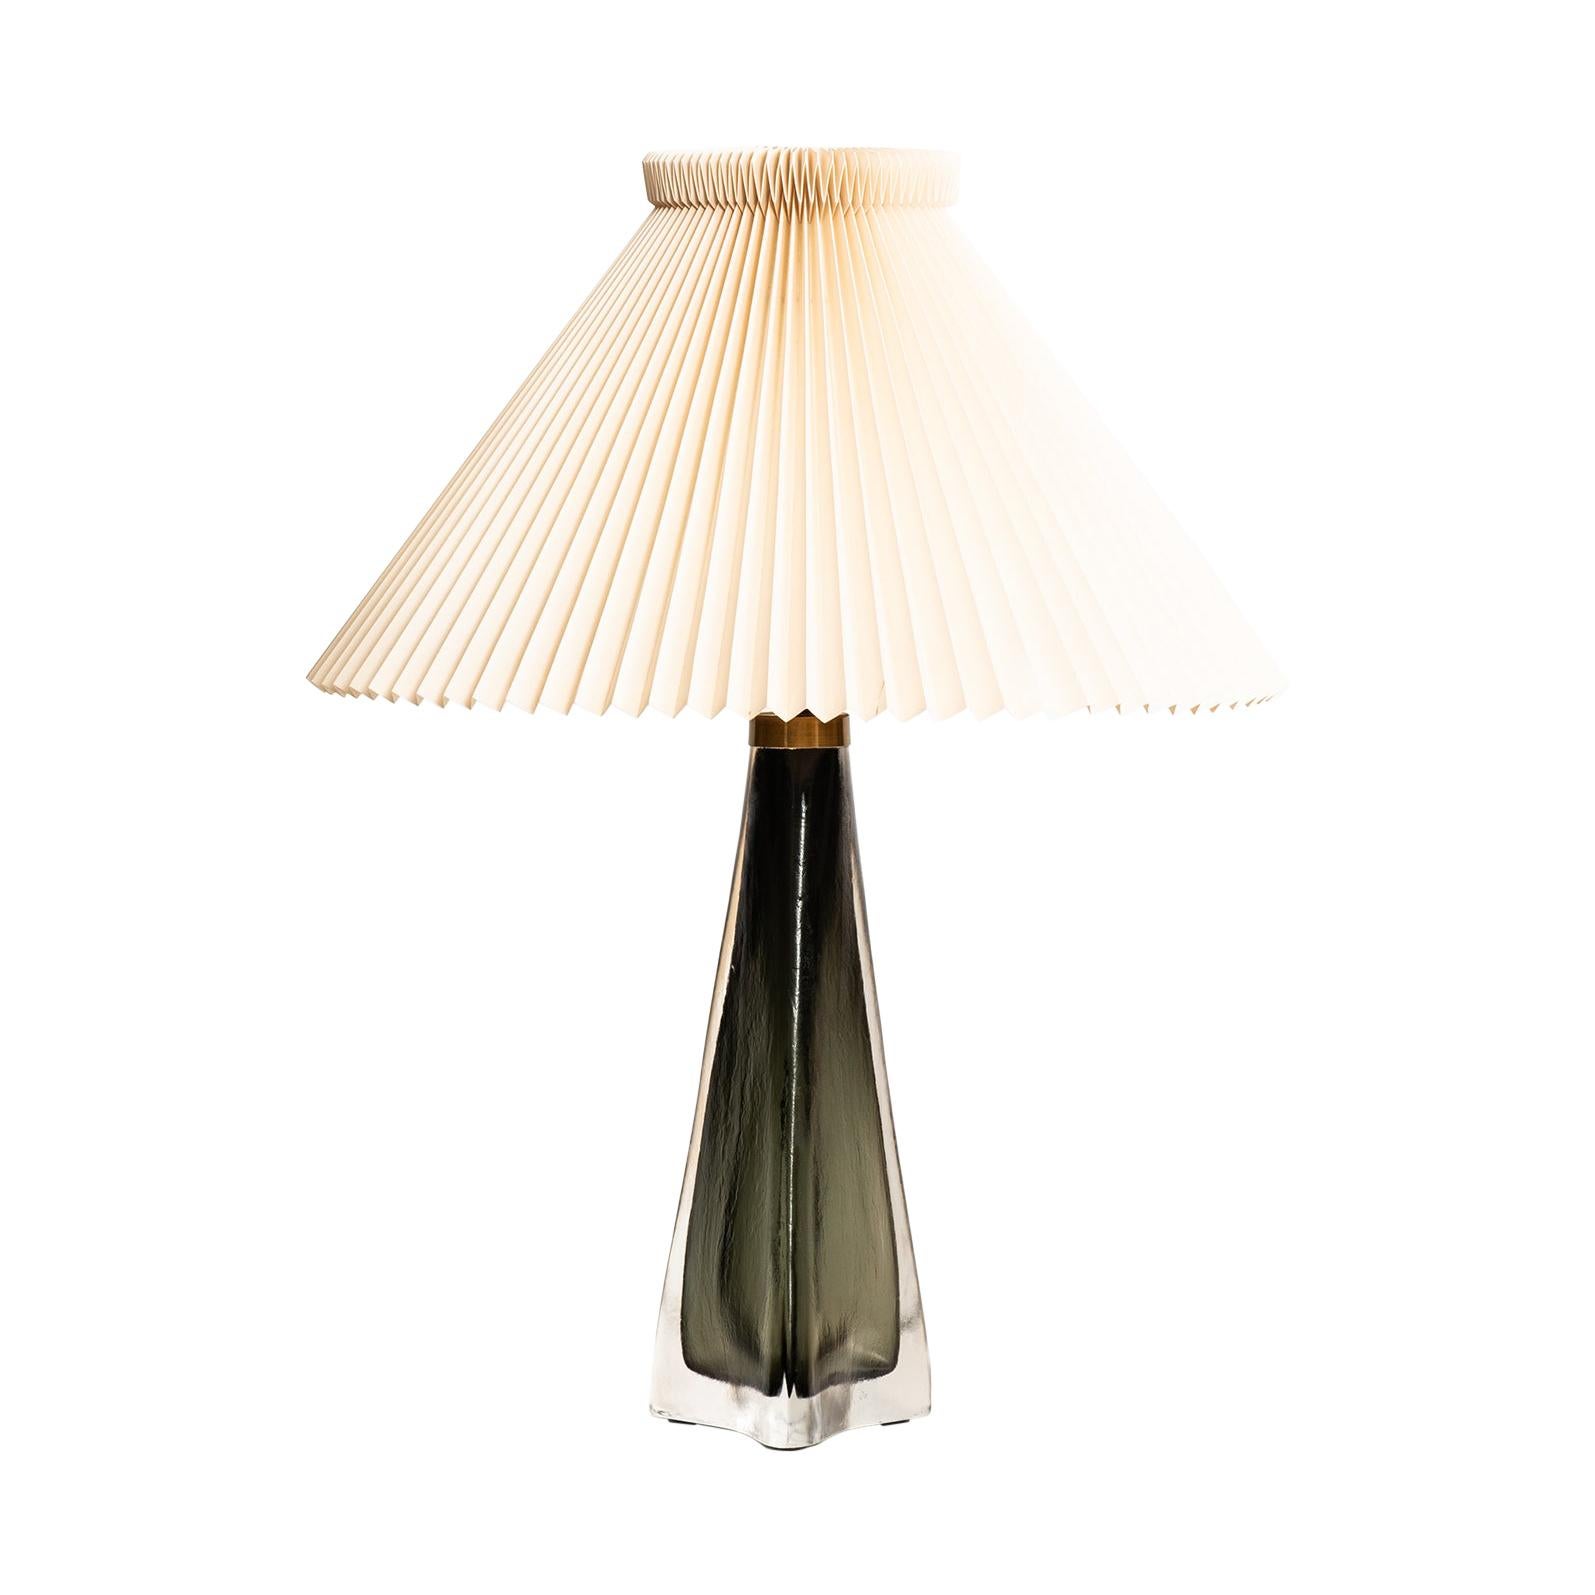 Carl Fagerlund Table Lamps Model RD1319 by Orrefors in Sweden